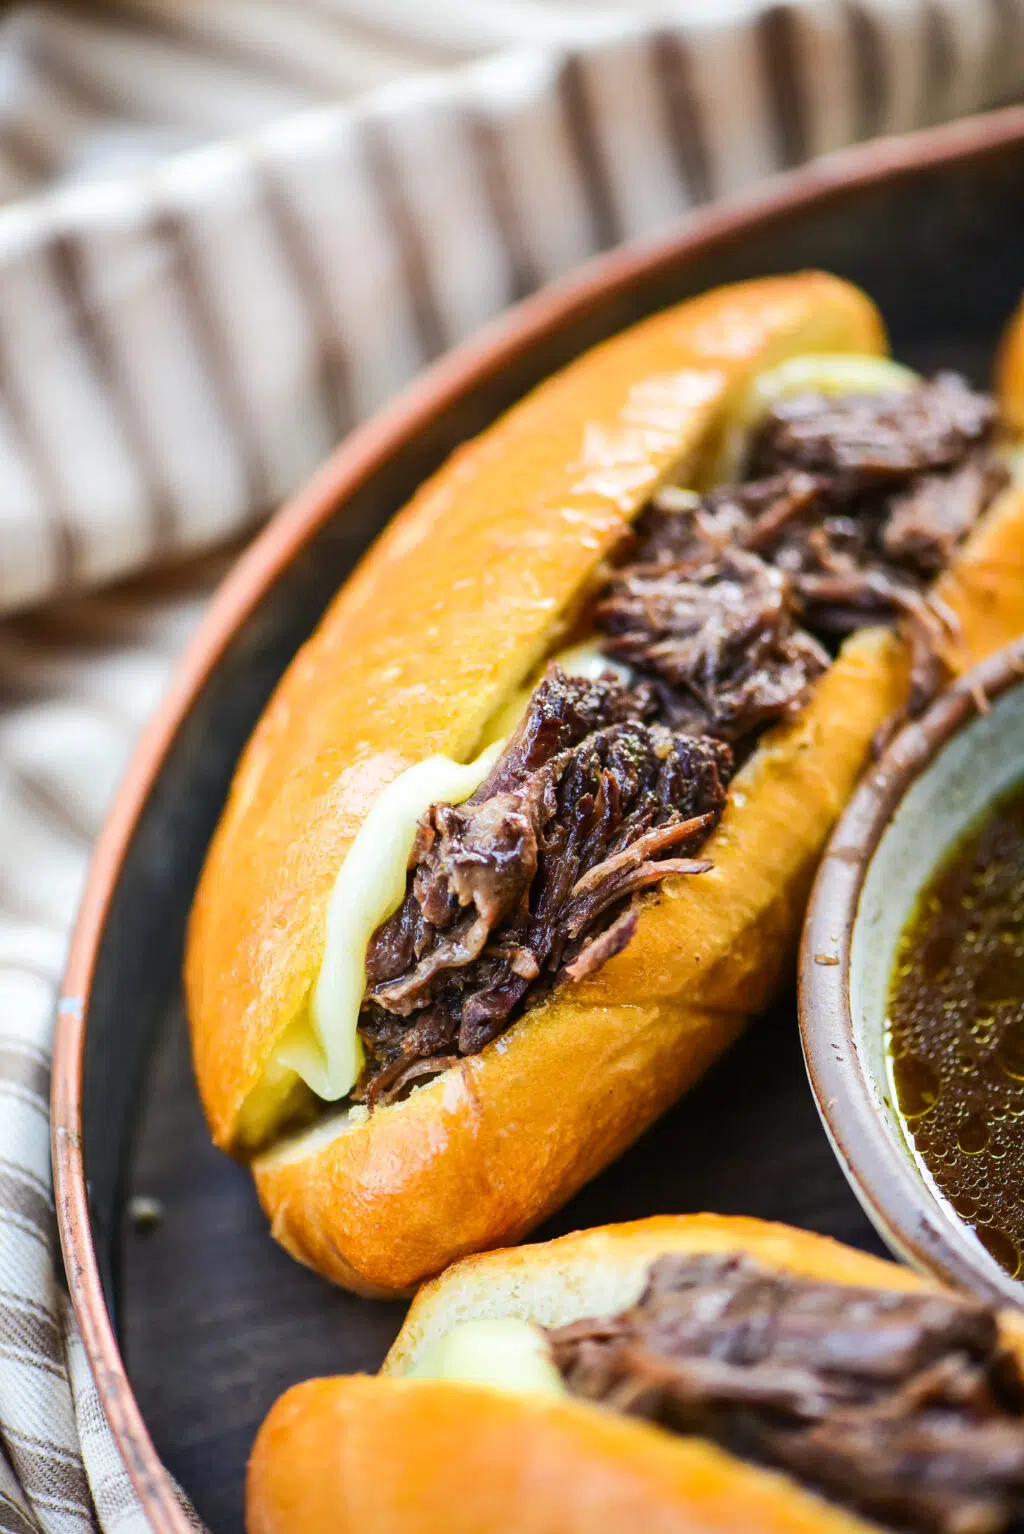 French dip sandwich with provolone cheese